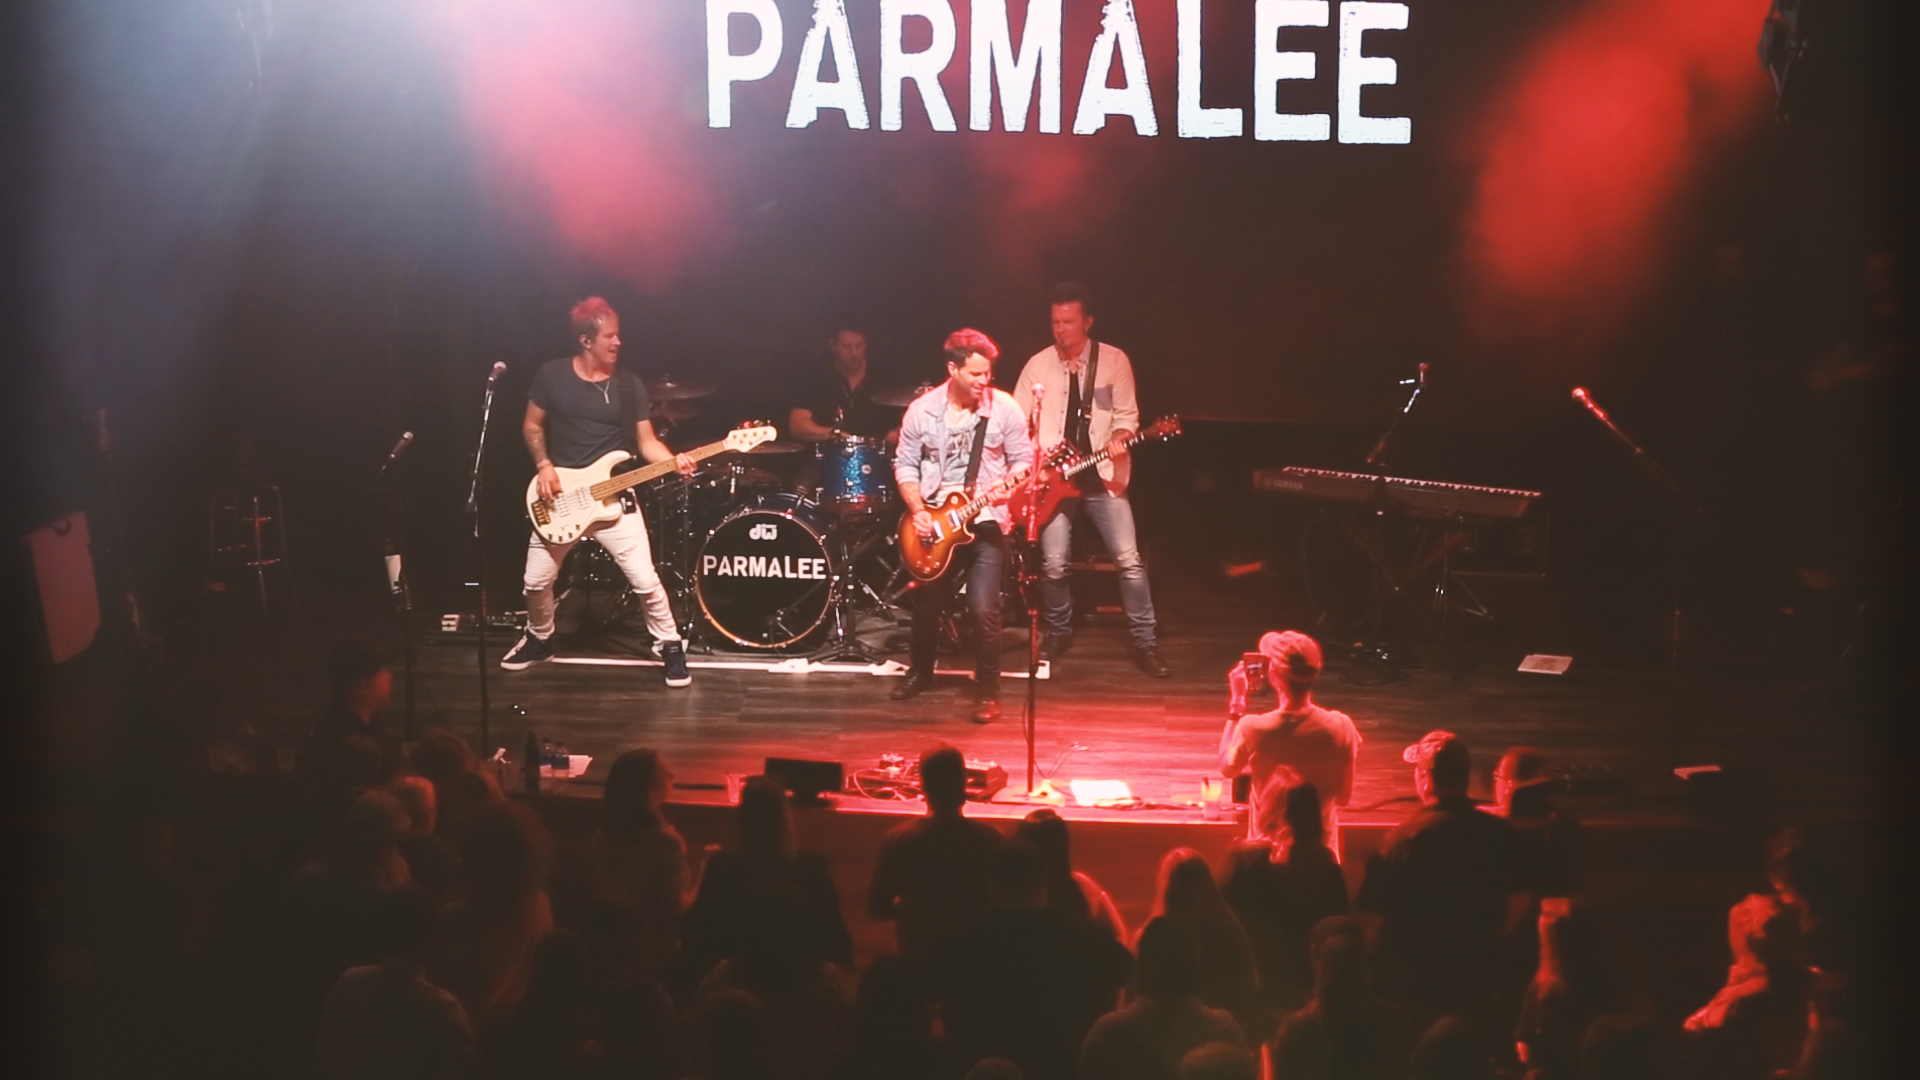 Parmalee Opens Up About (And Decodes) Their Secret Language “Parmalisms”